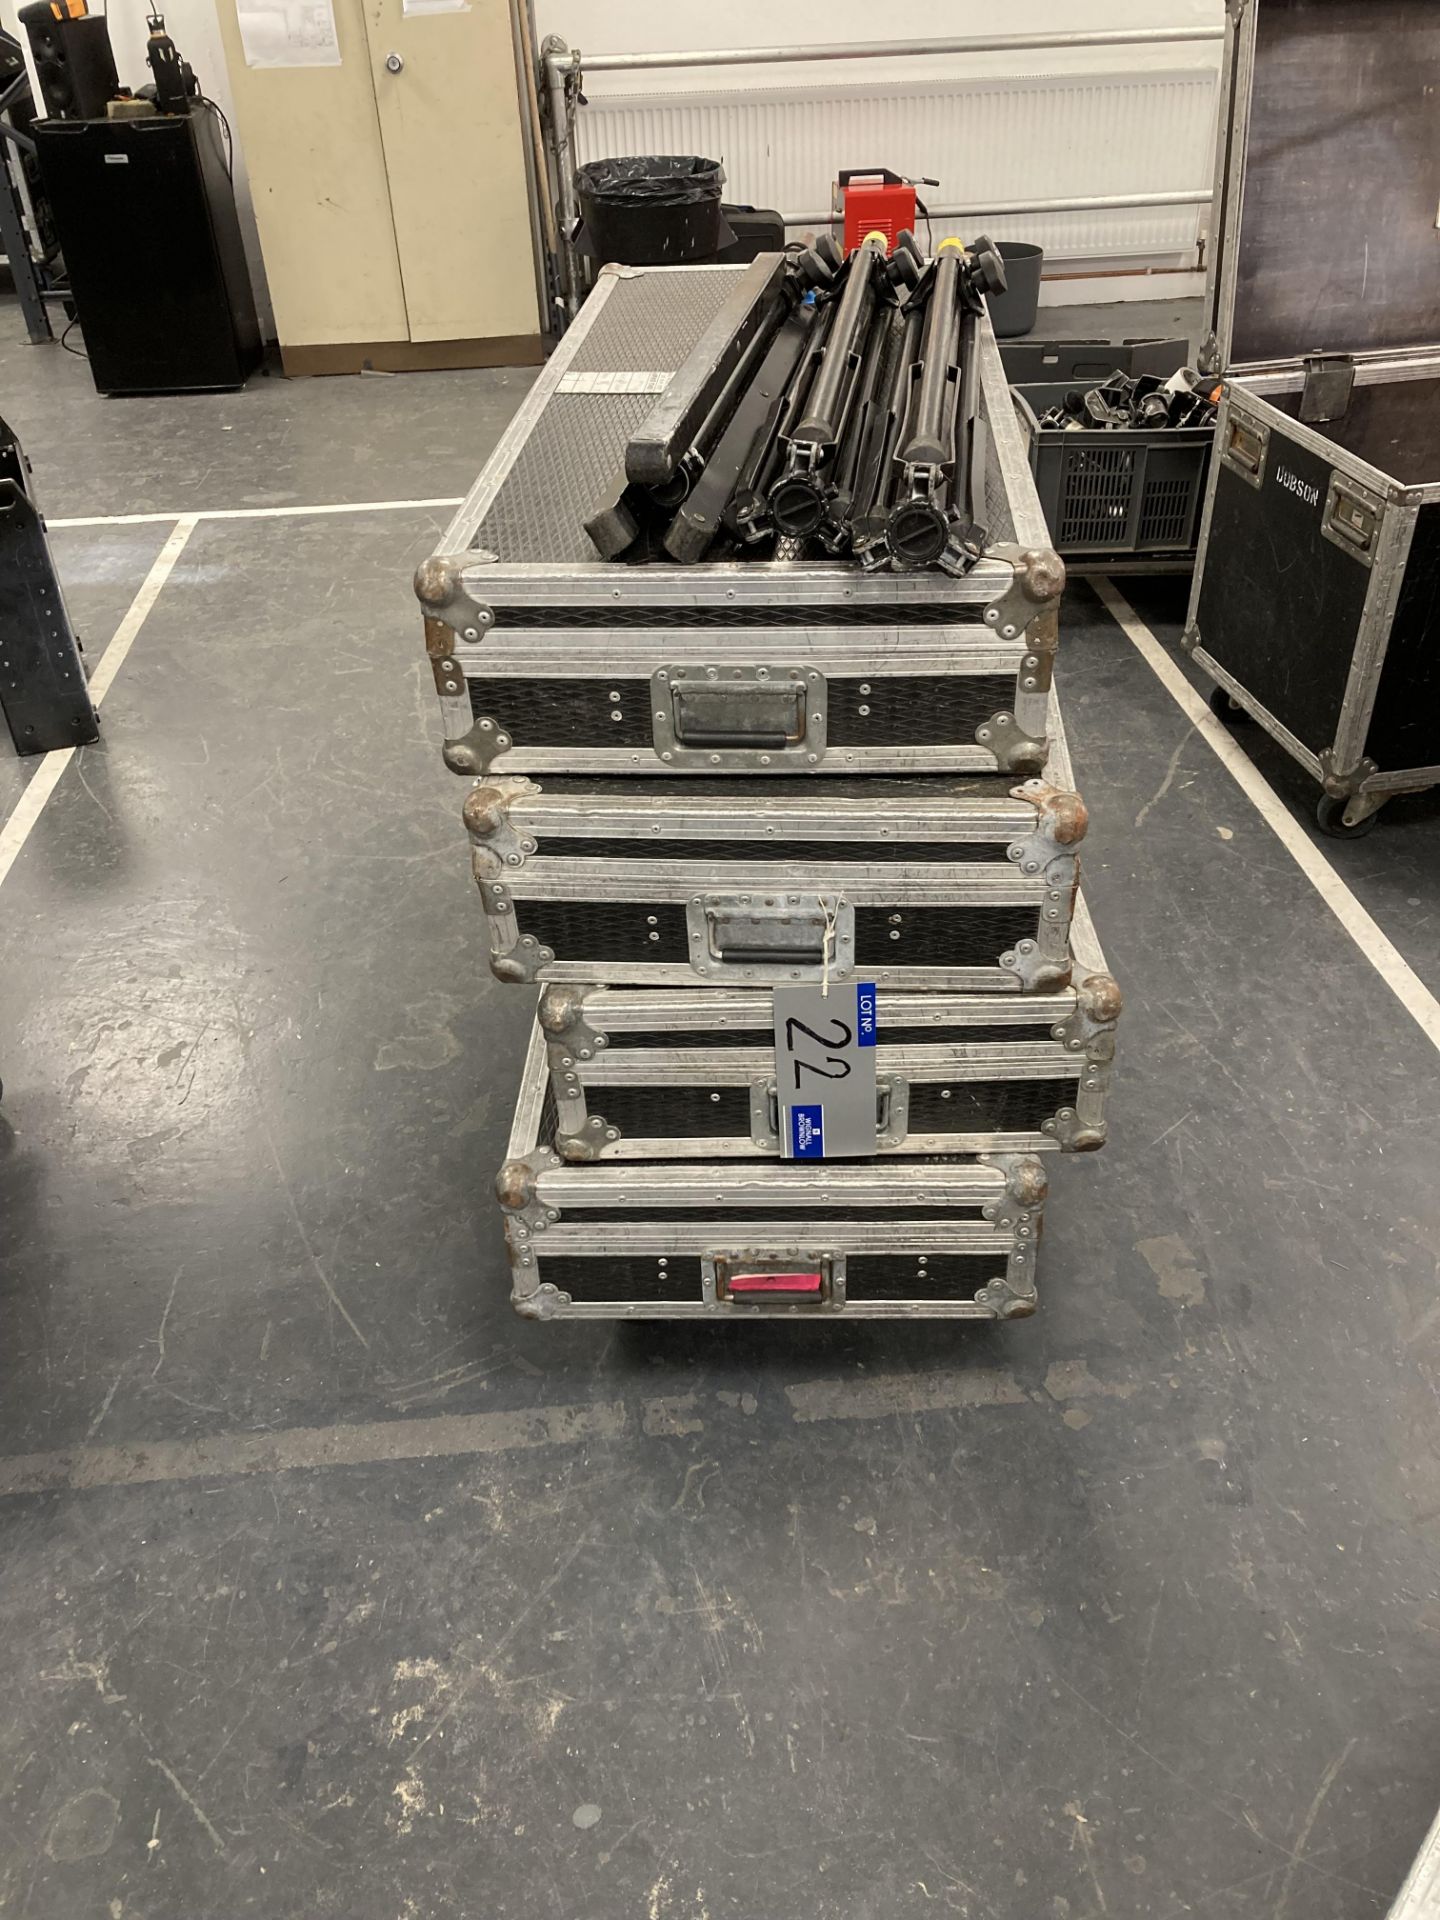 4-4 way Tripod Speaker Stand with cases and 3 Various Speaker Stands, flightcases worn (located at